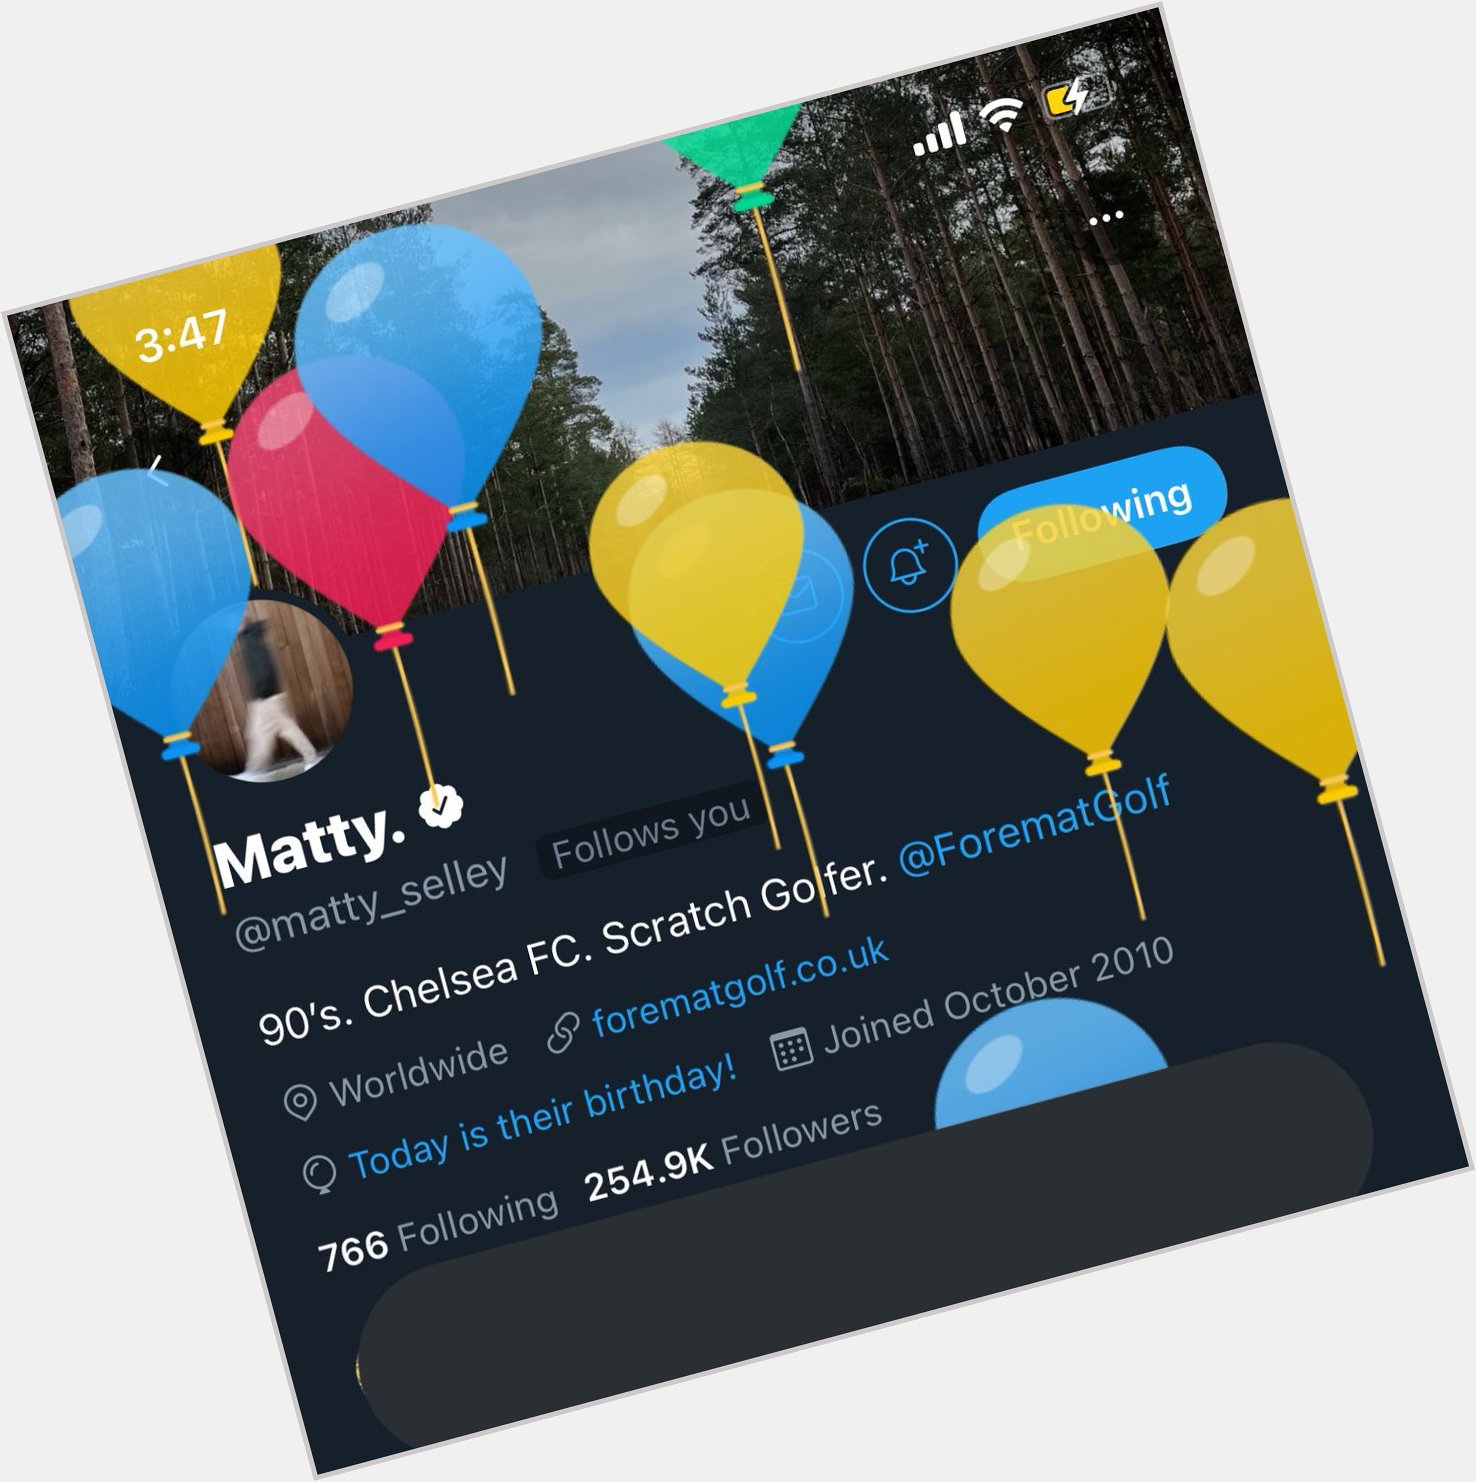  happy birthday!! look at the cool balloons :D 